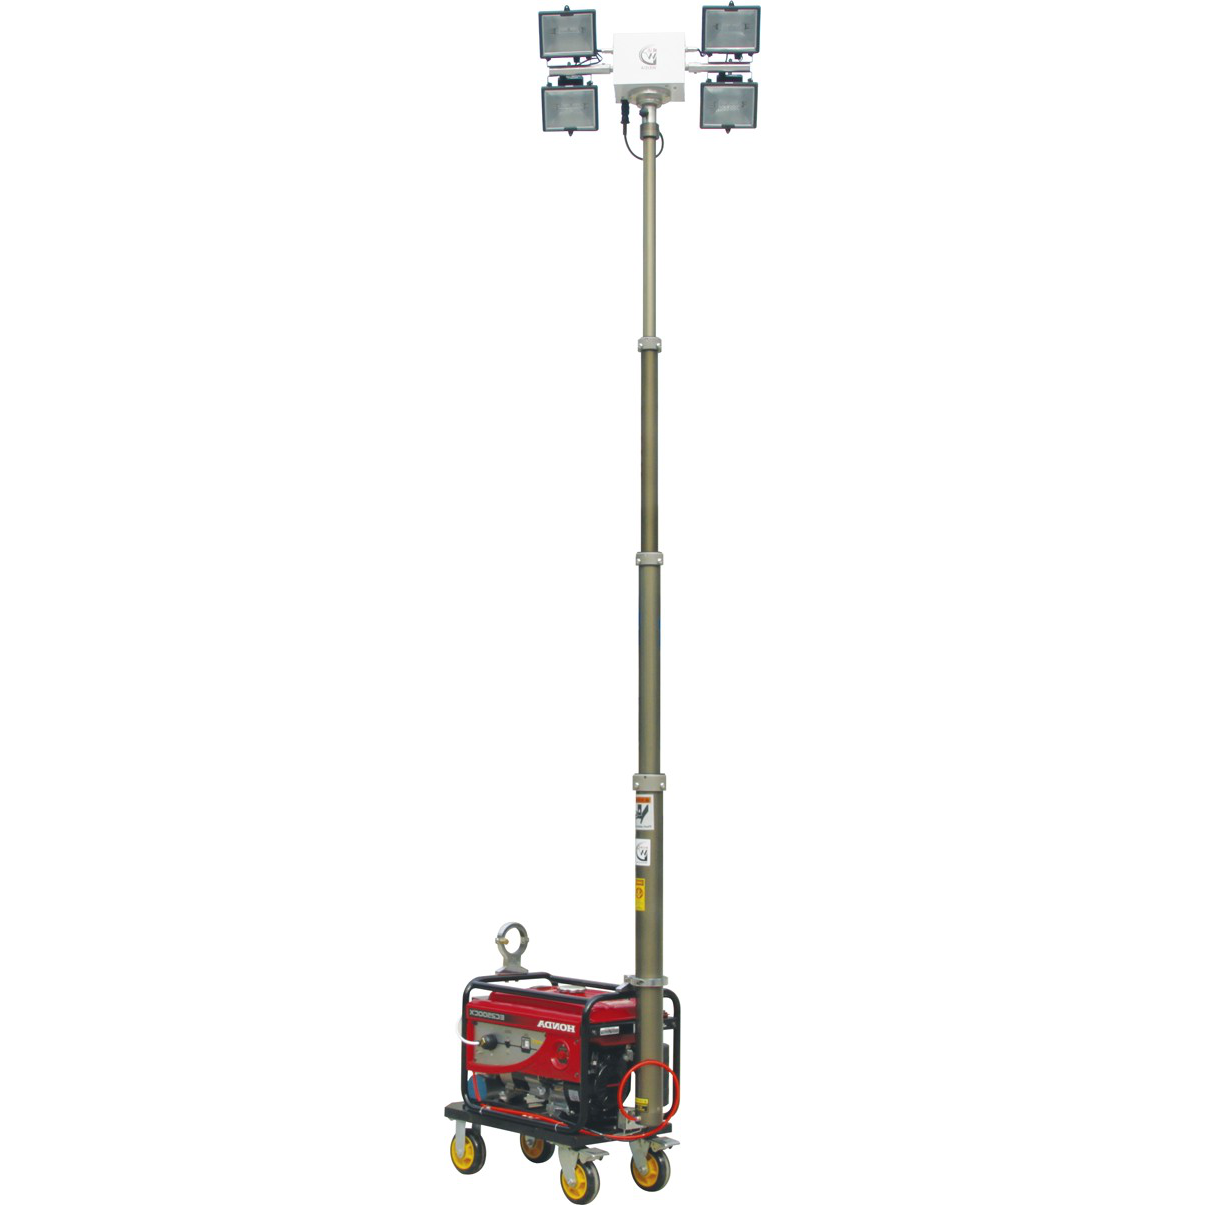 JD-4000A omnidirectional automatic lifting working lamp